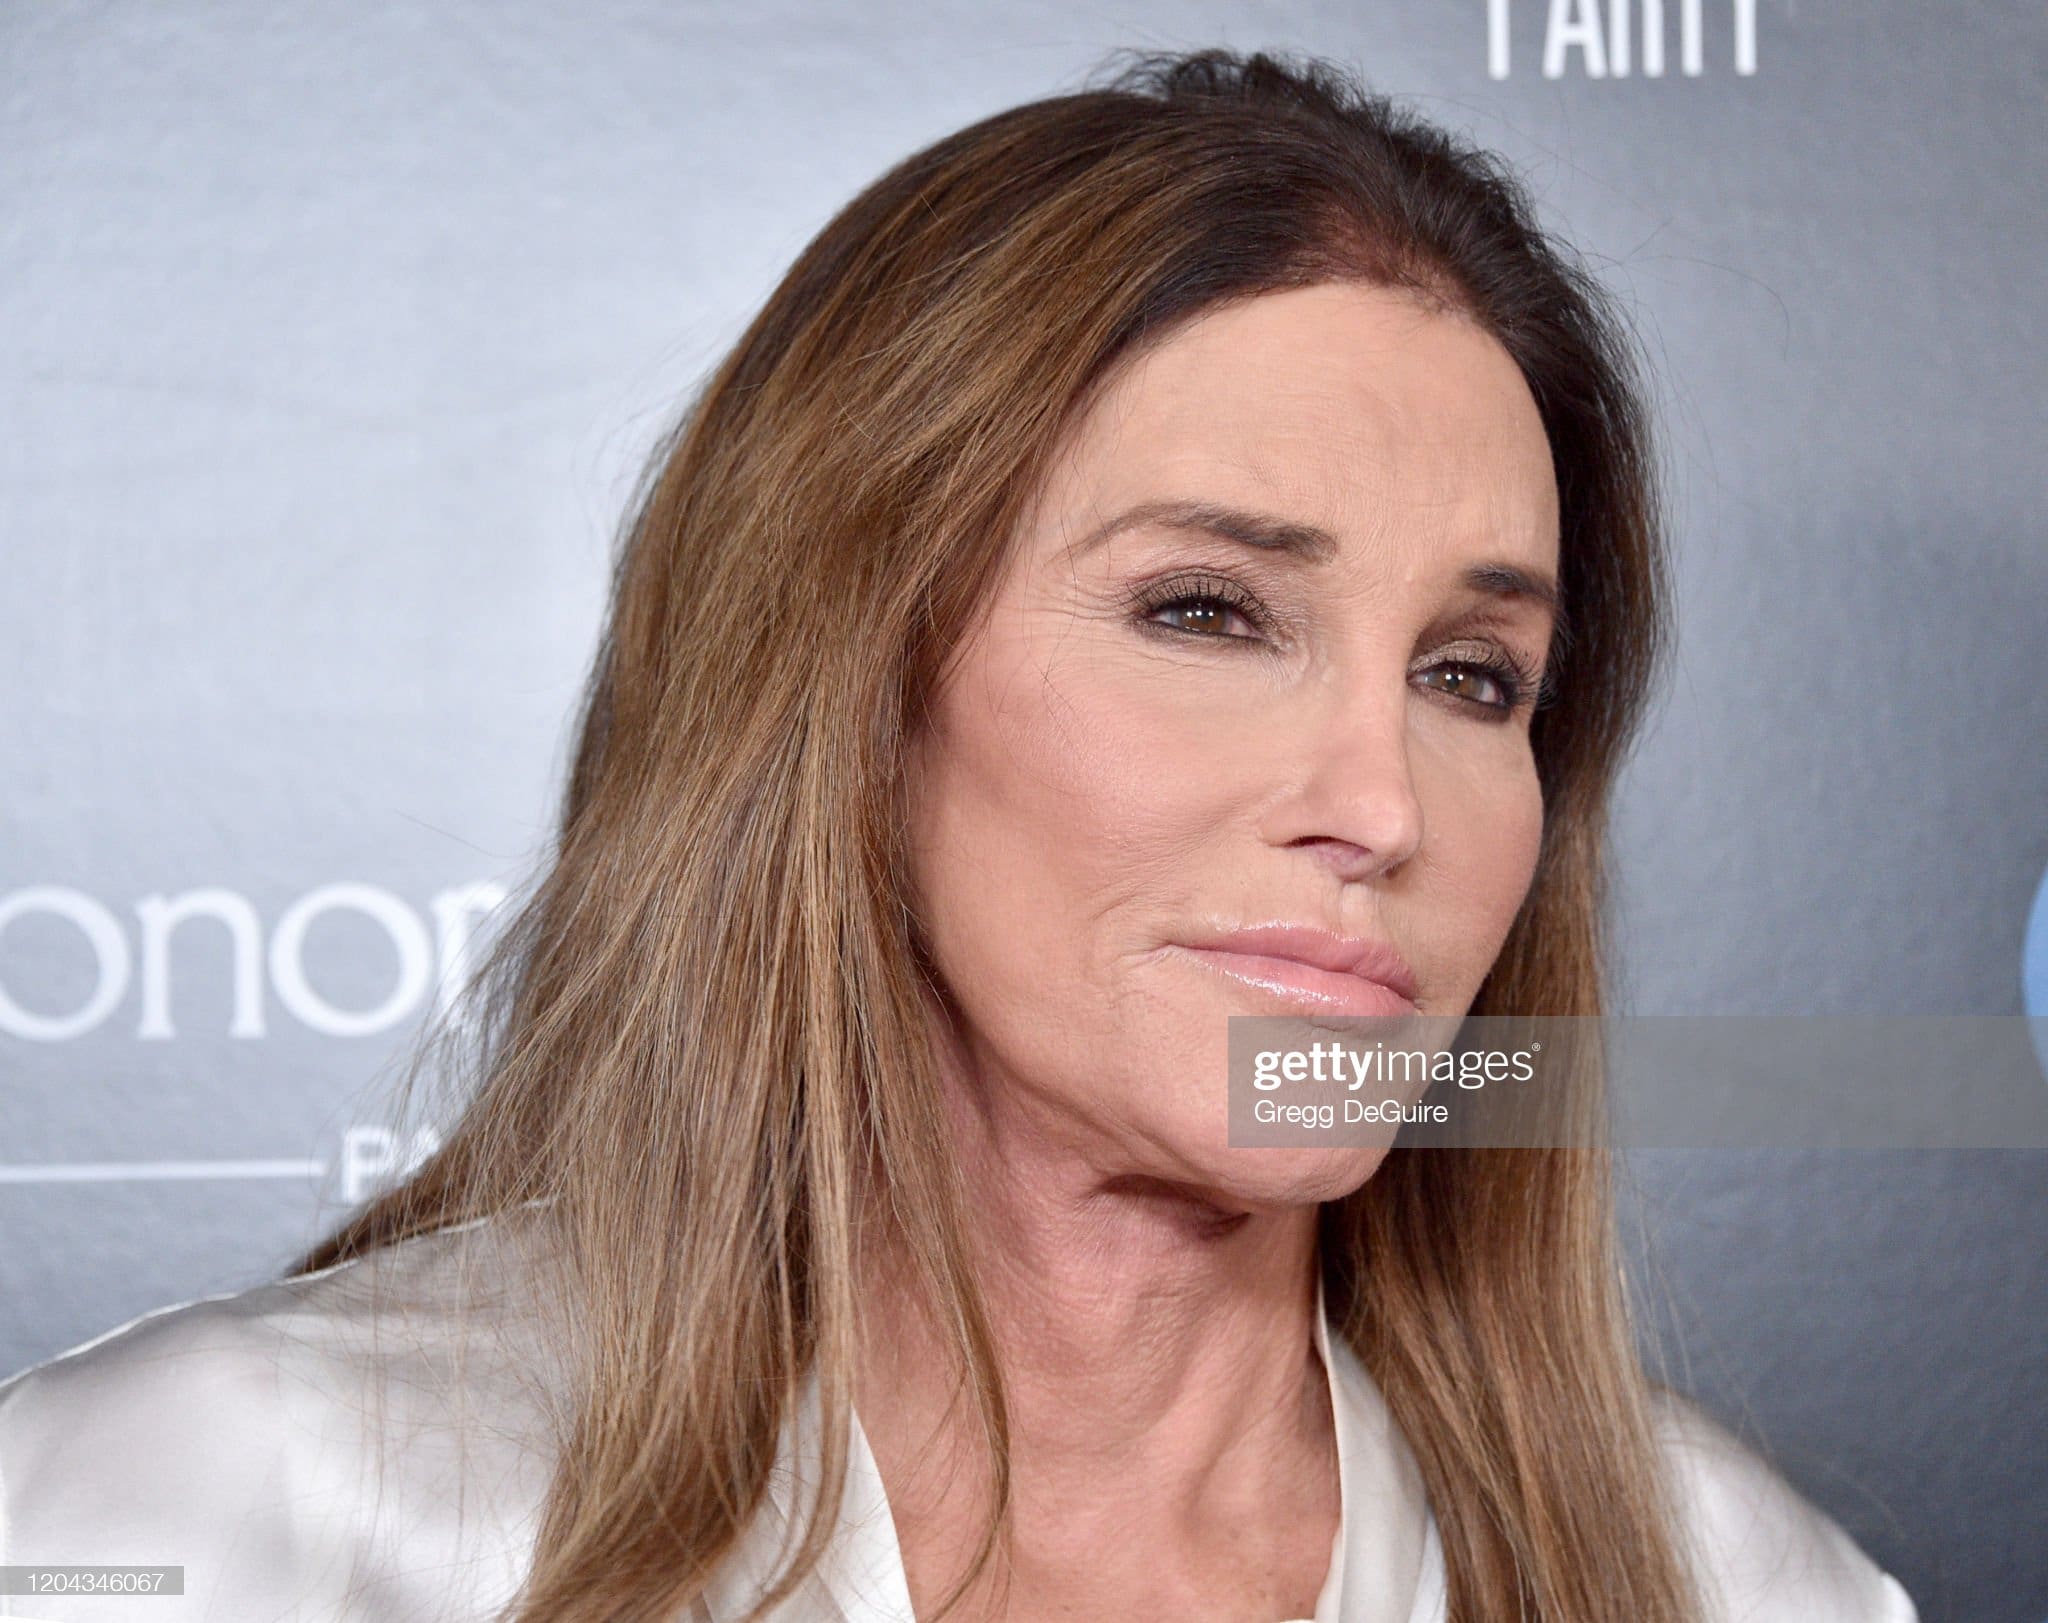 caitlyn-jenner-says-people-think-theyre-trans-because-of-publicity